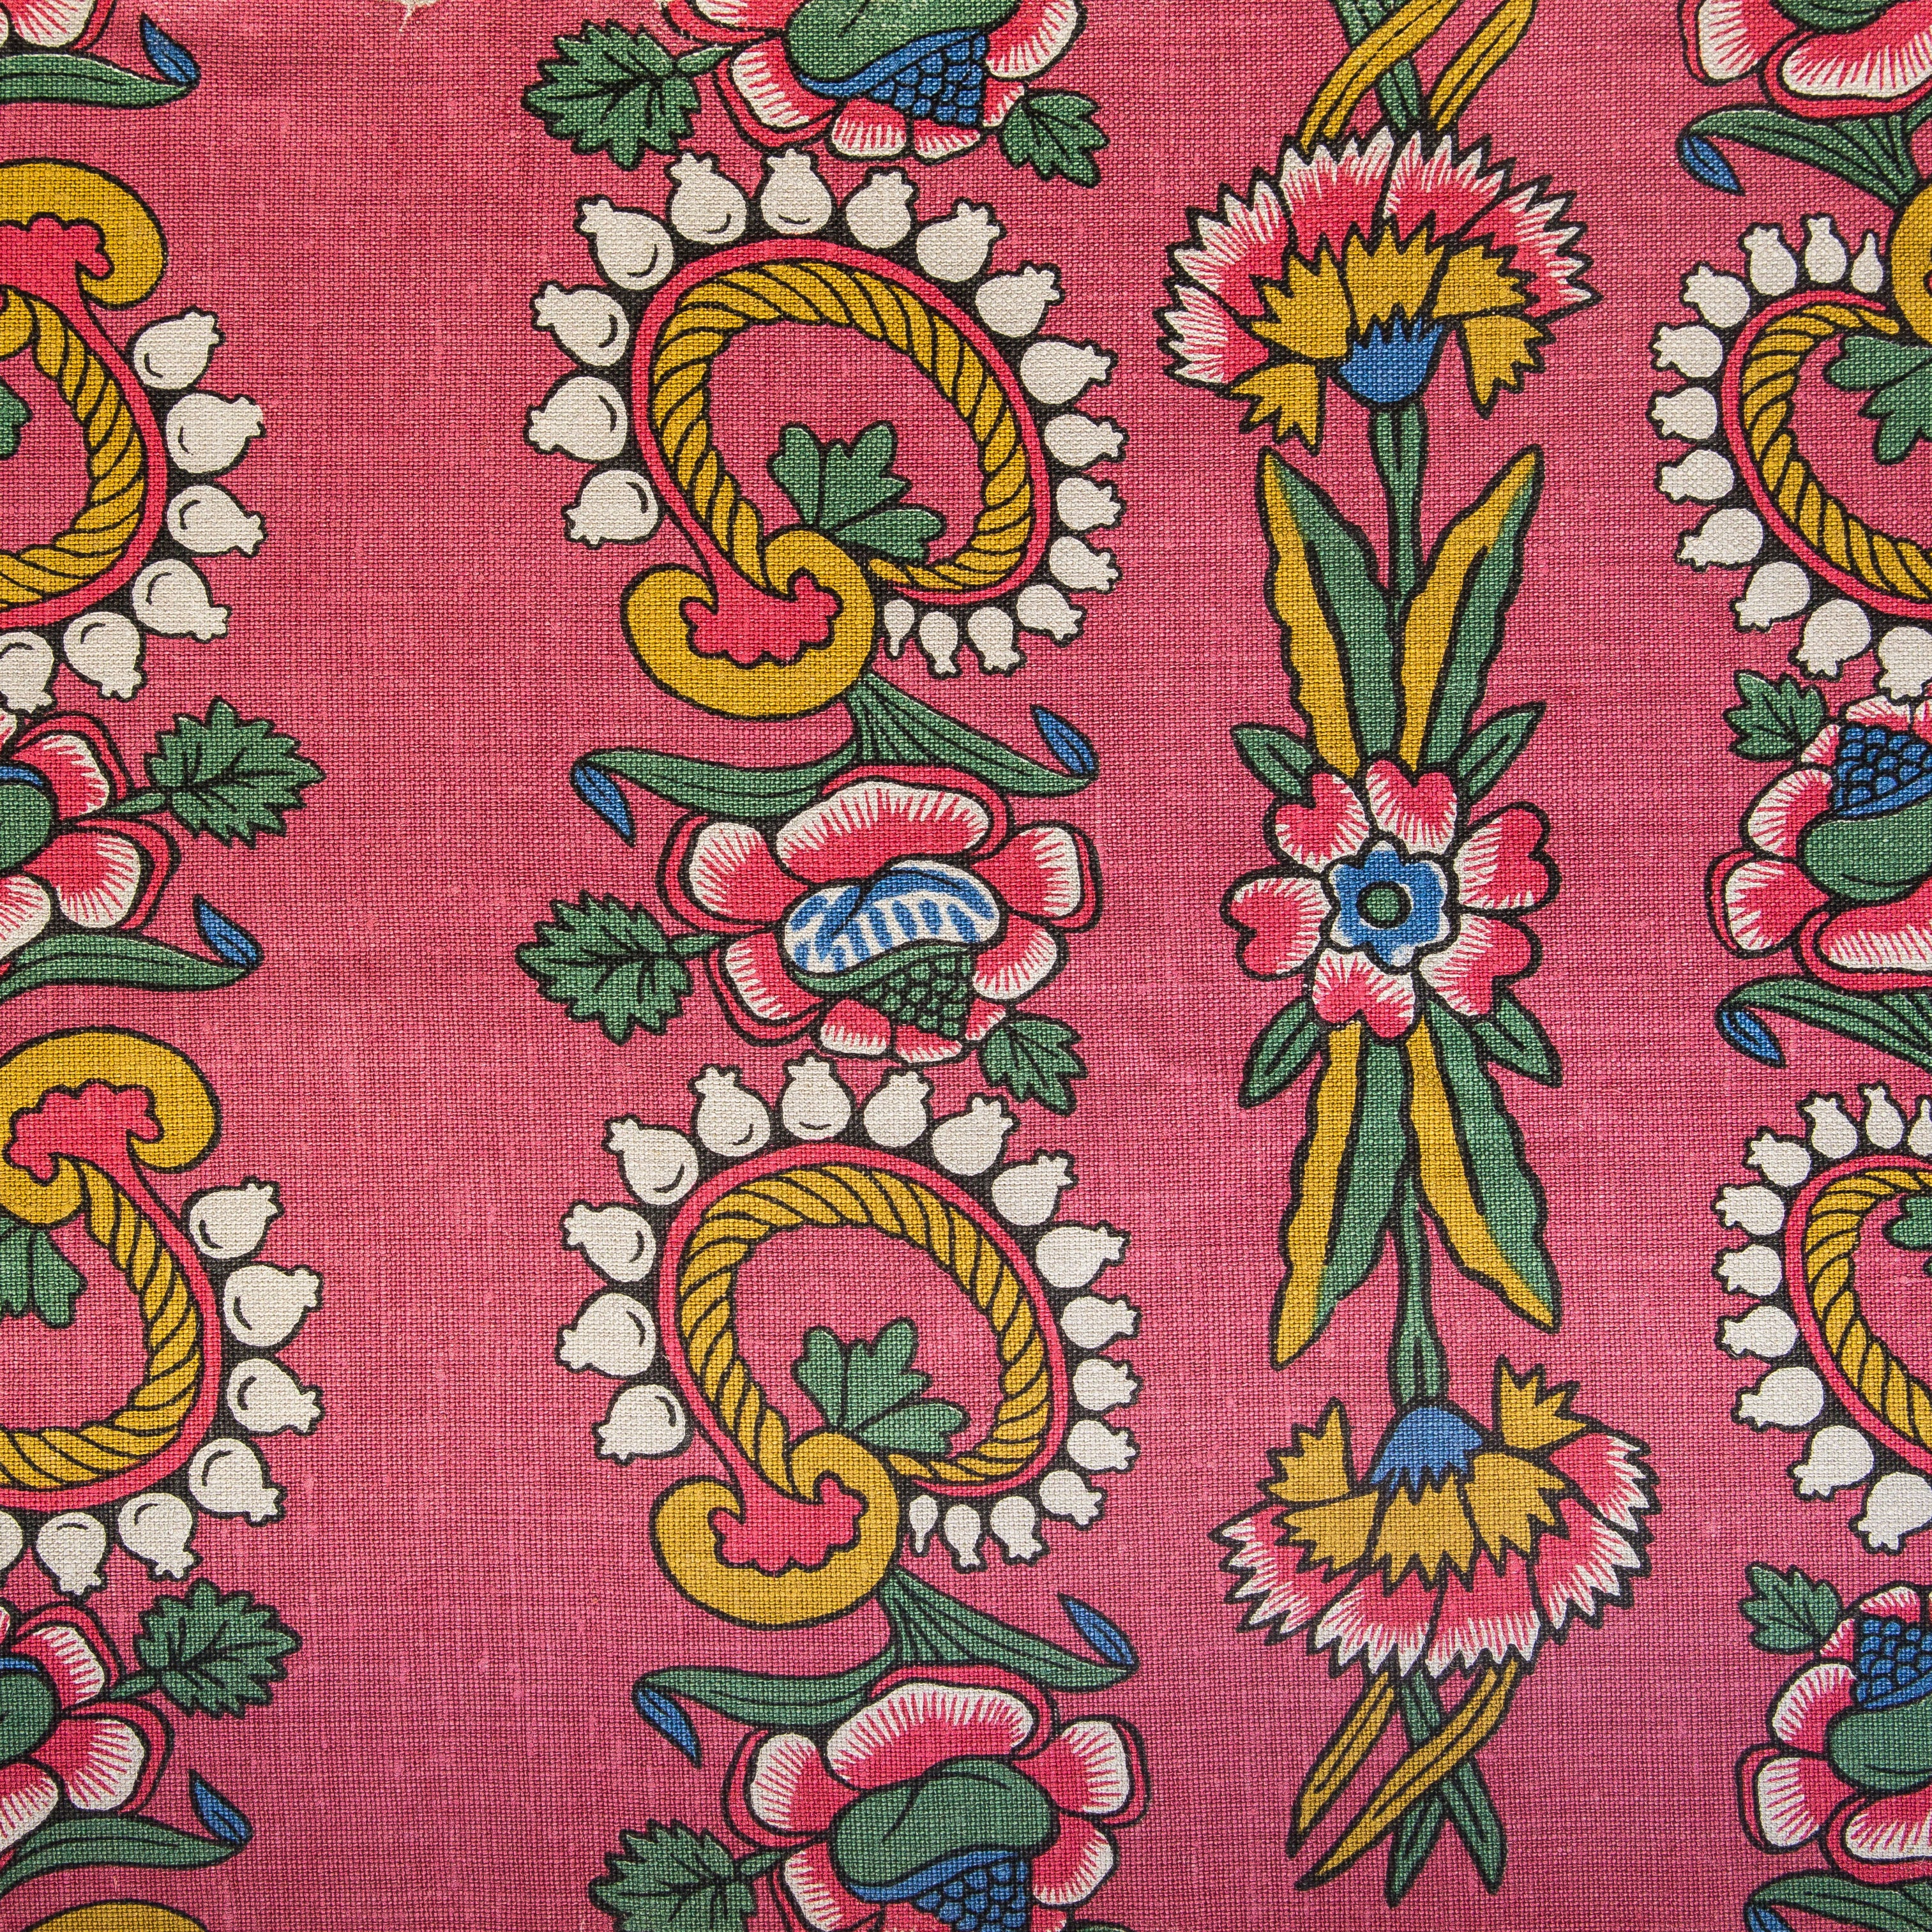 Detail of fabric in a dense floral stripe in pink, yellow and green on a pink field.